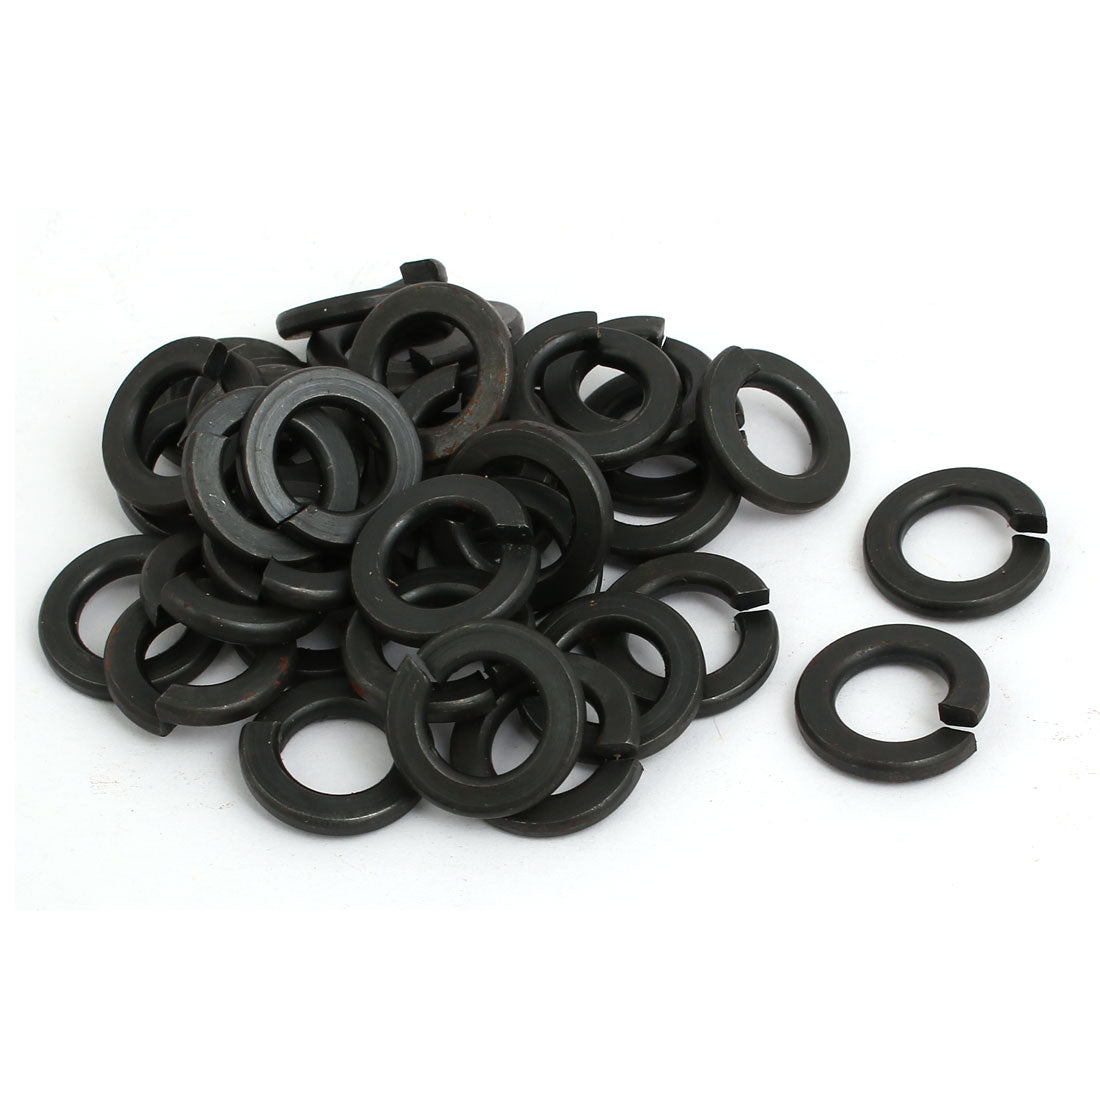 uxcell Uxcell 40pcs 7/16-inch Inner Dia Carbon Steel Split Lock Spring Washer Gasket Black